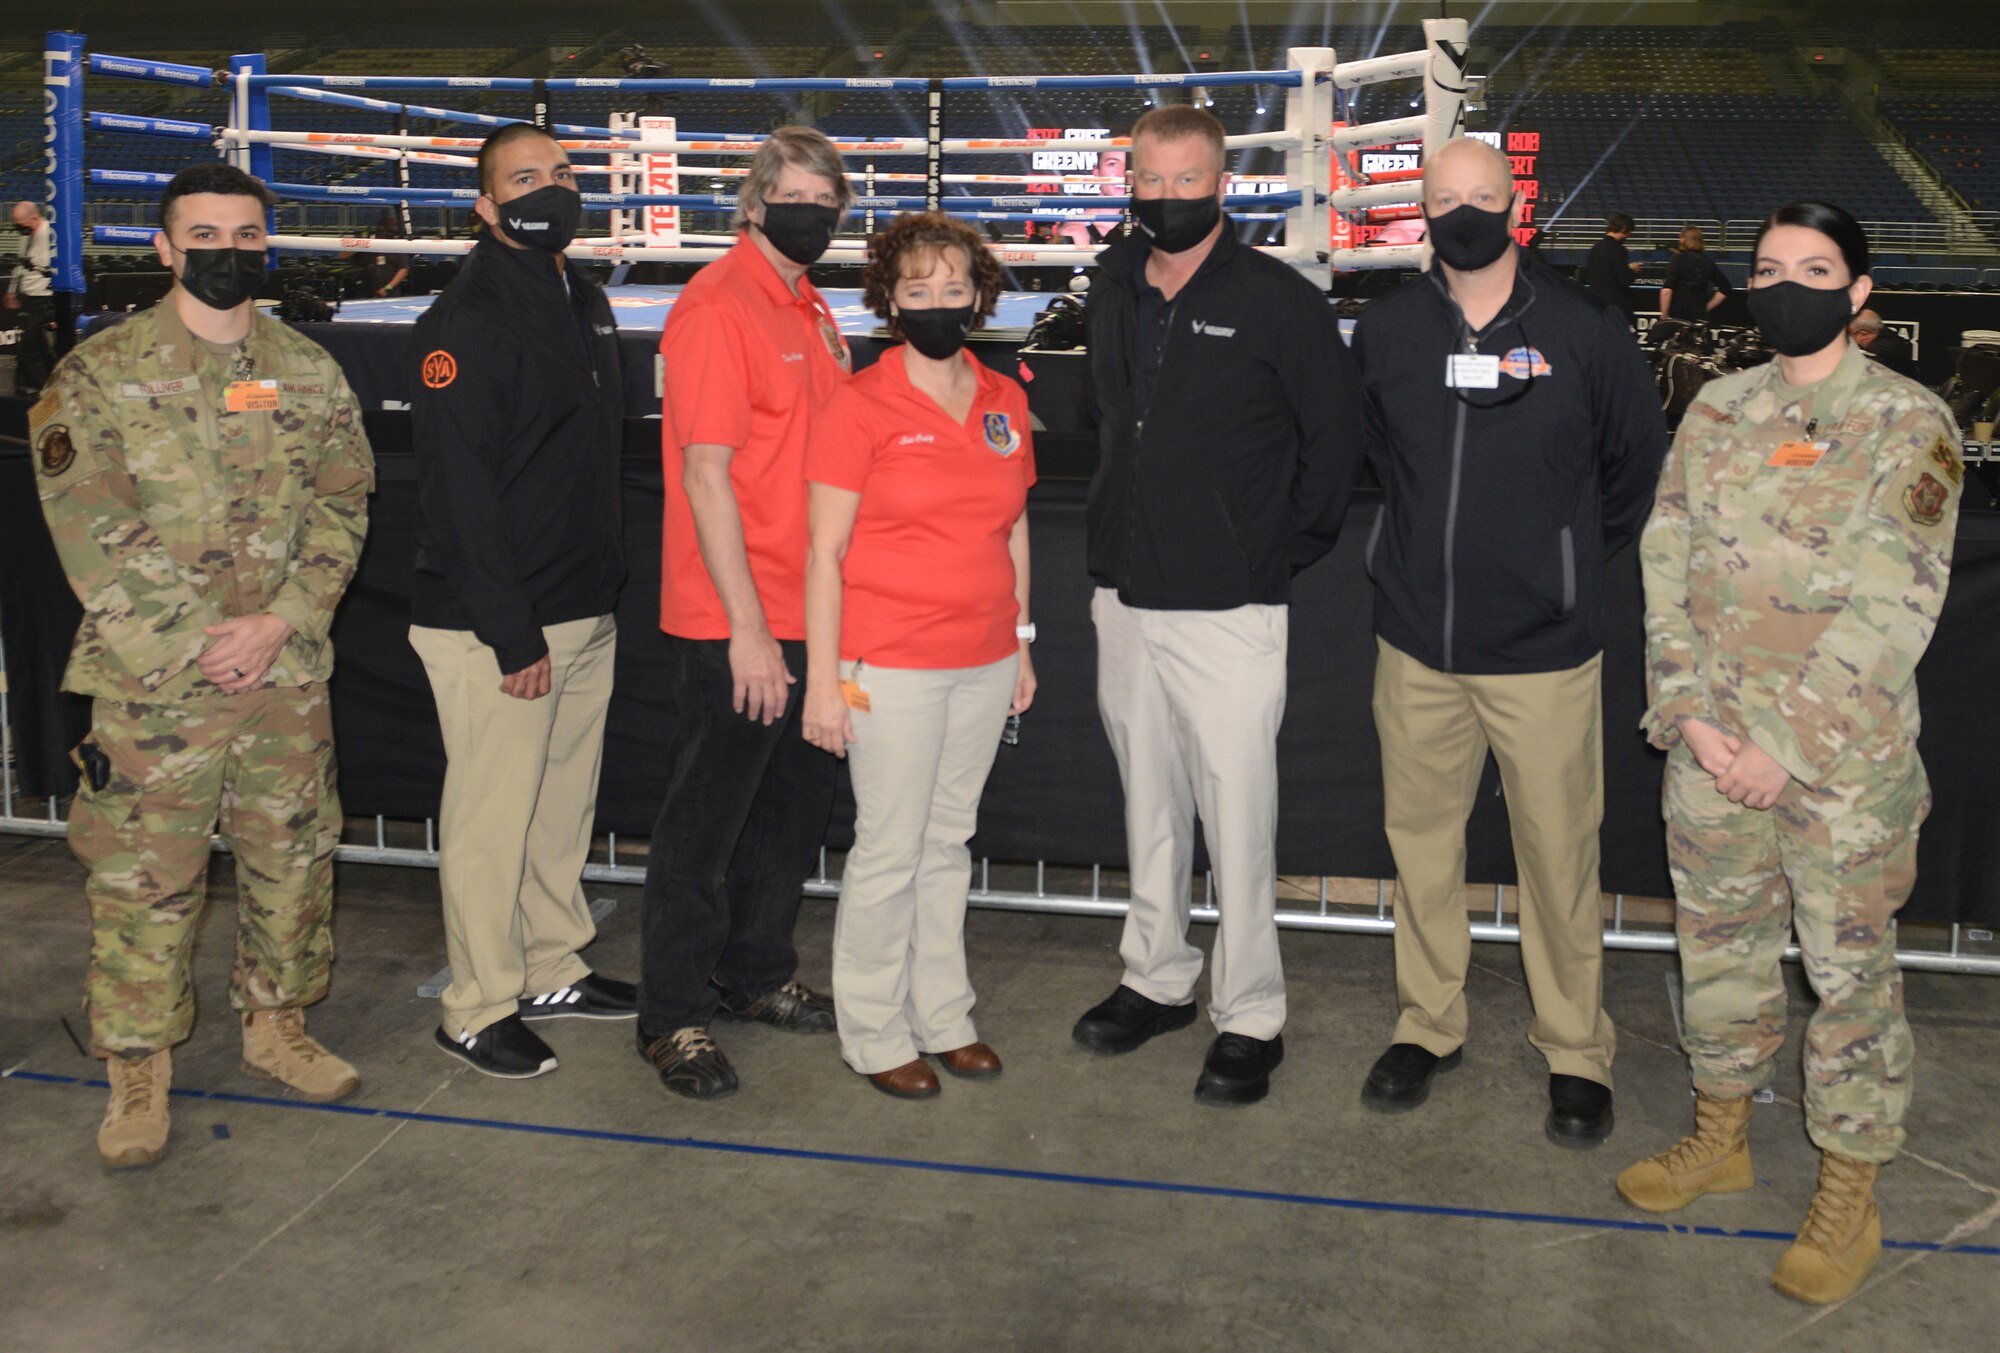 Col. Lisa Craig (middle top photo), AFRS deputy commander, was able to take in her first event since coming to Air Force Recruiting Service, as she toured the activation of the WBA Super World Super Middleweight Championship fight at the Alamodome in San Antonio, Dec. 19, 2020.